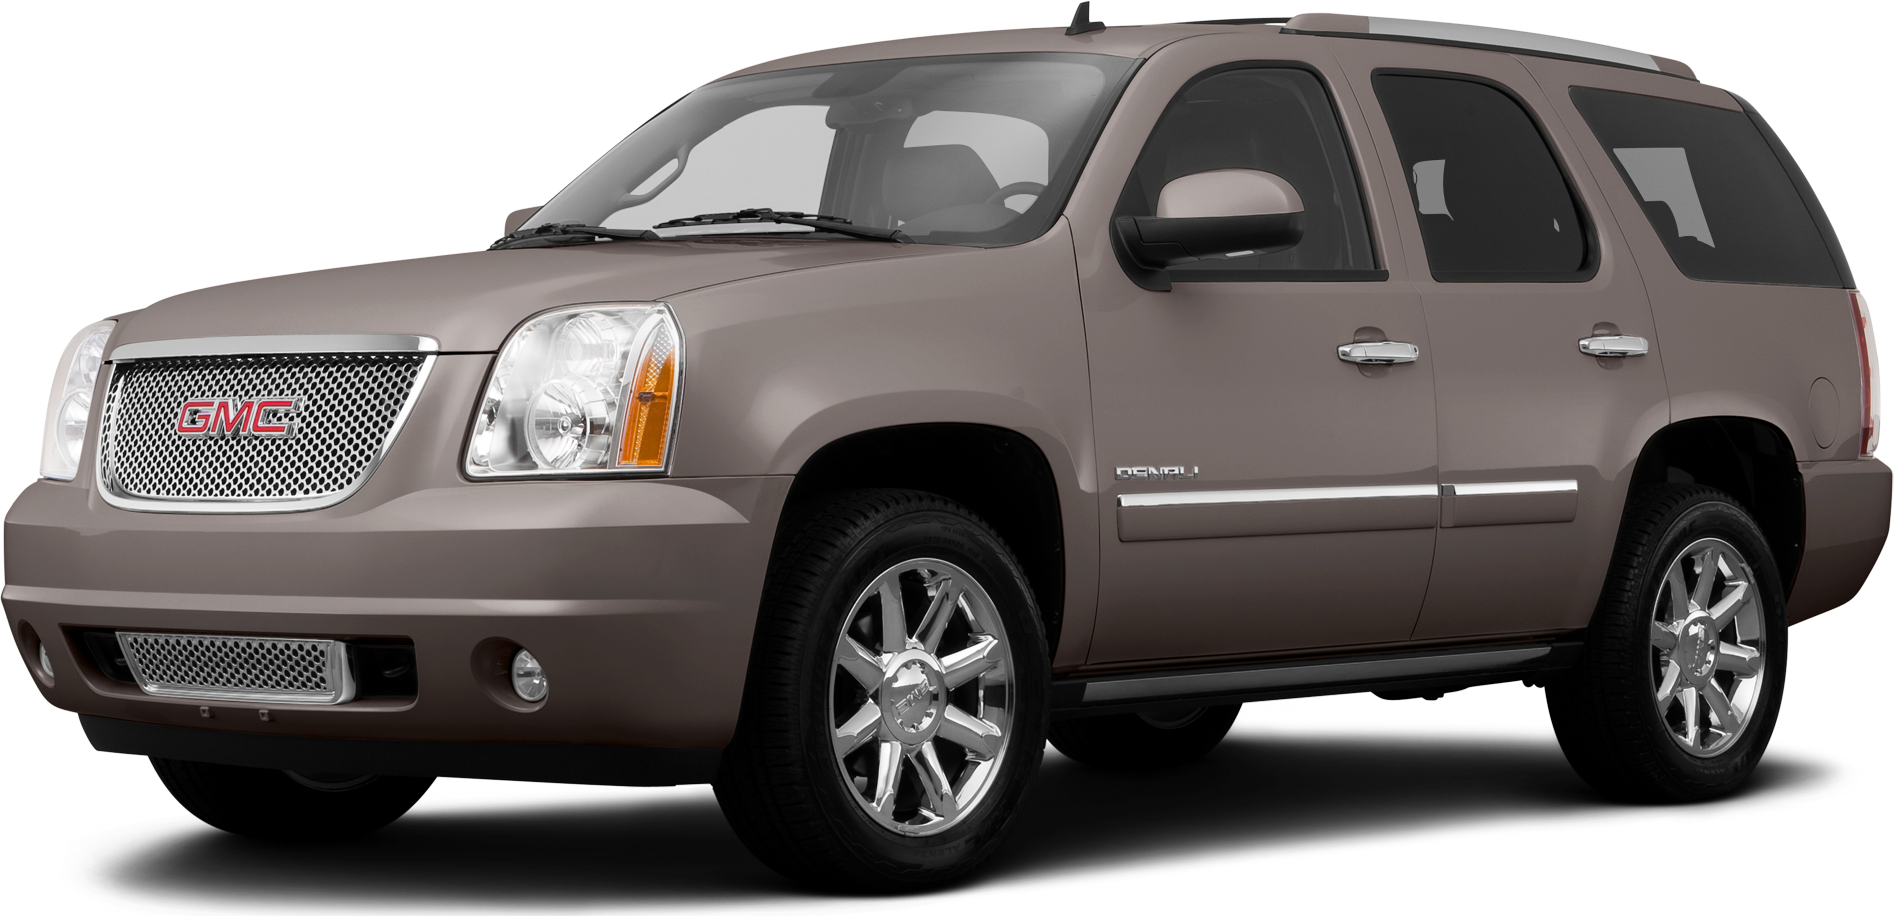 2014 GMC Yukon Specs and Features | Kelley Blue Book